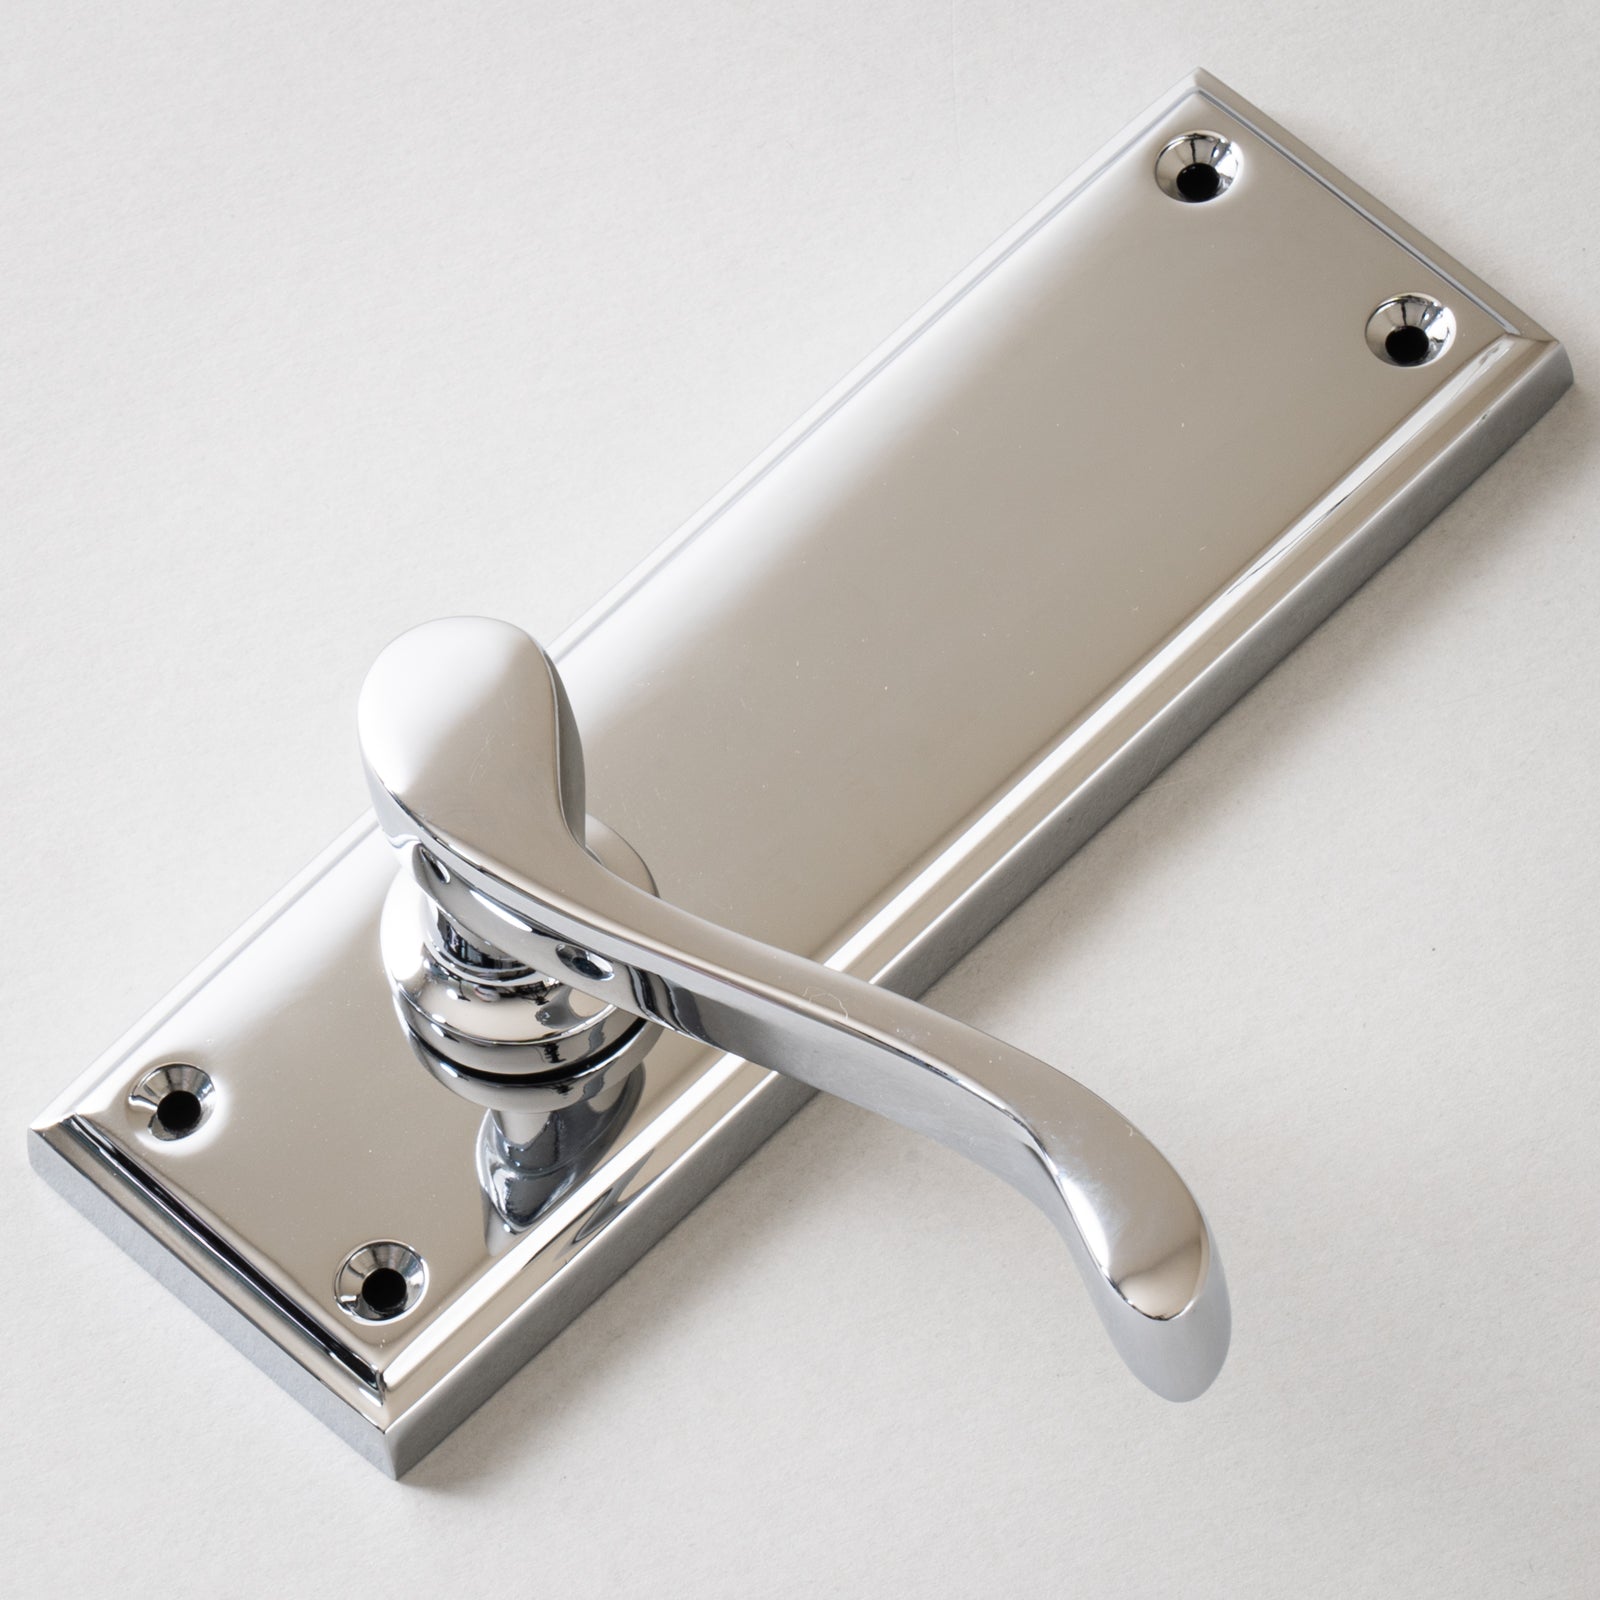 Edwardian Door Handles On Plate Latch Handle in Polished Chrome SHOW